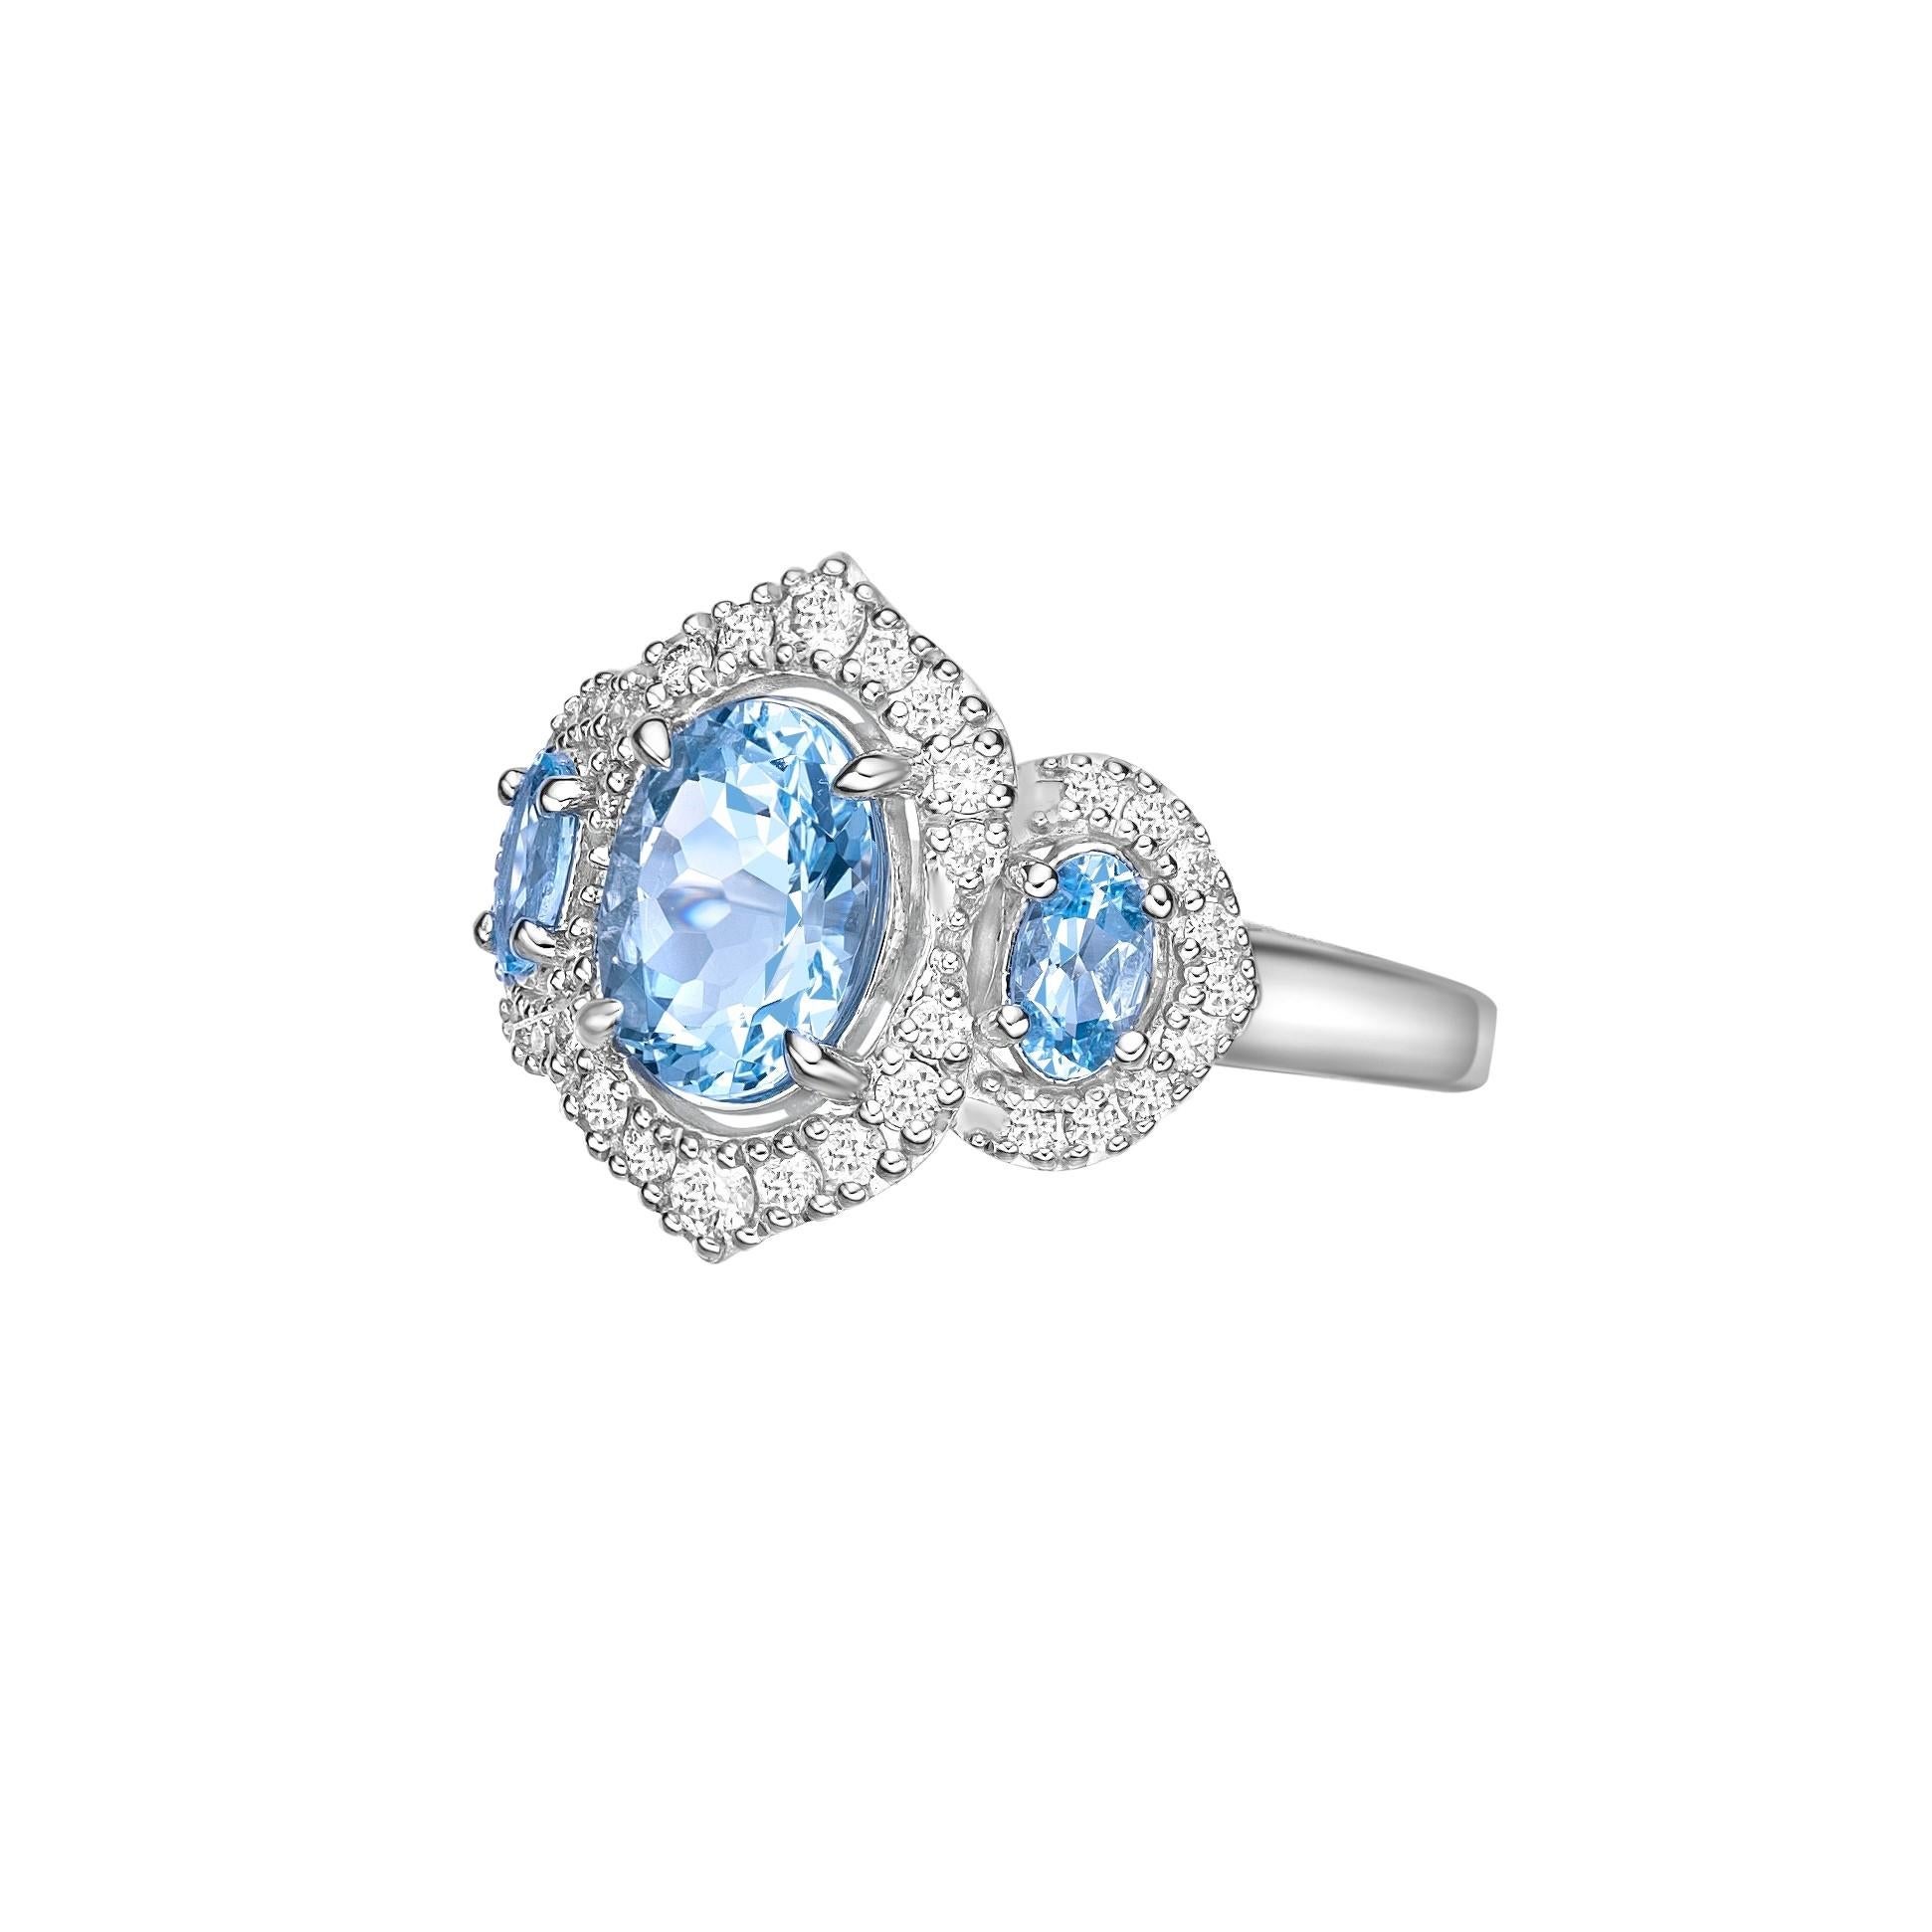 Oval Cut 1.54 Carat Aquamarine Fancy Ring in 18Karat White Gold with White Diamond.   For Sale